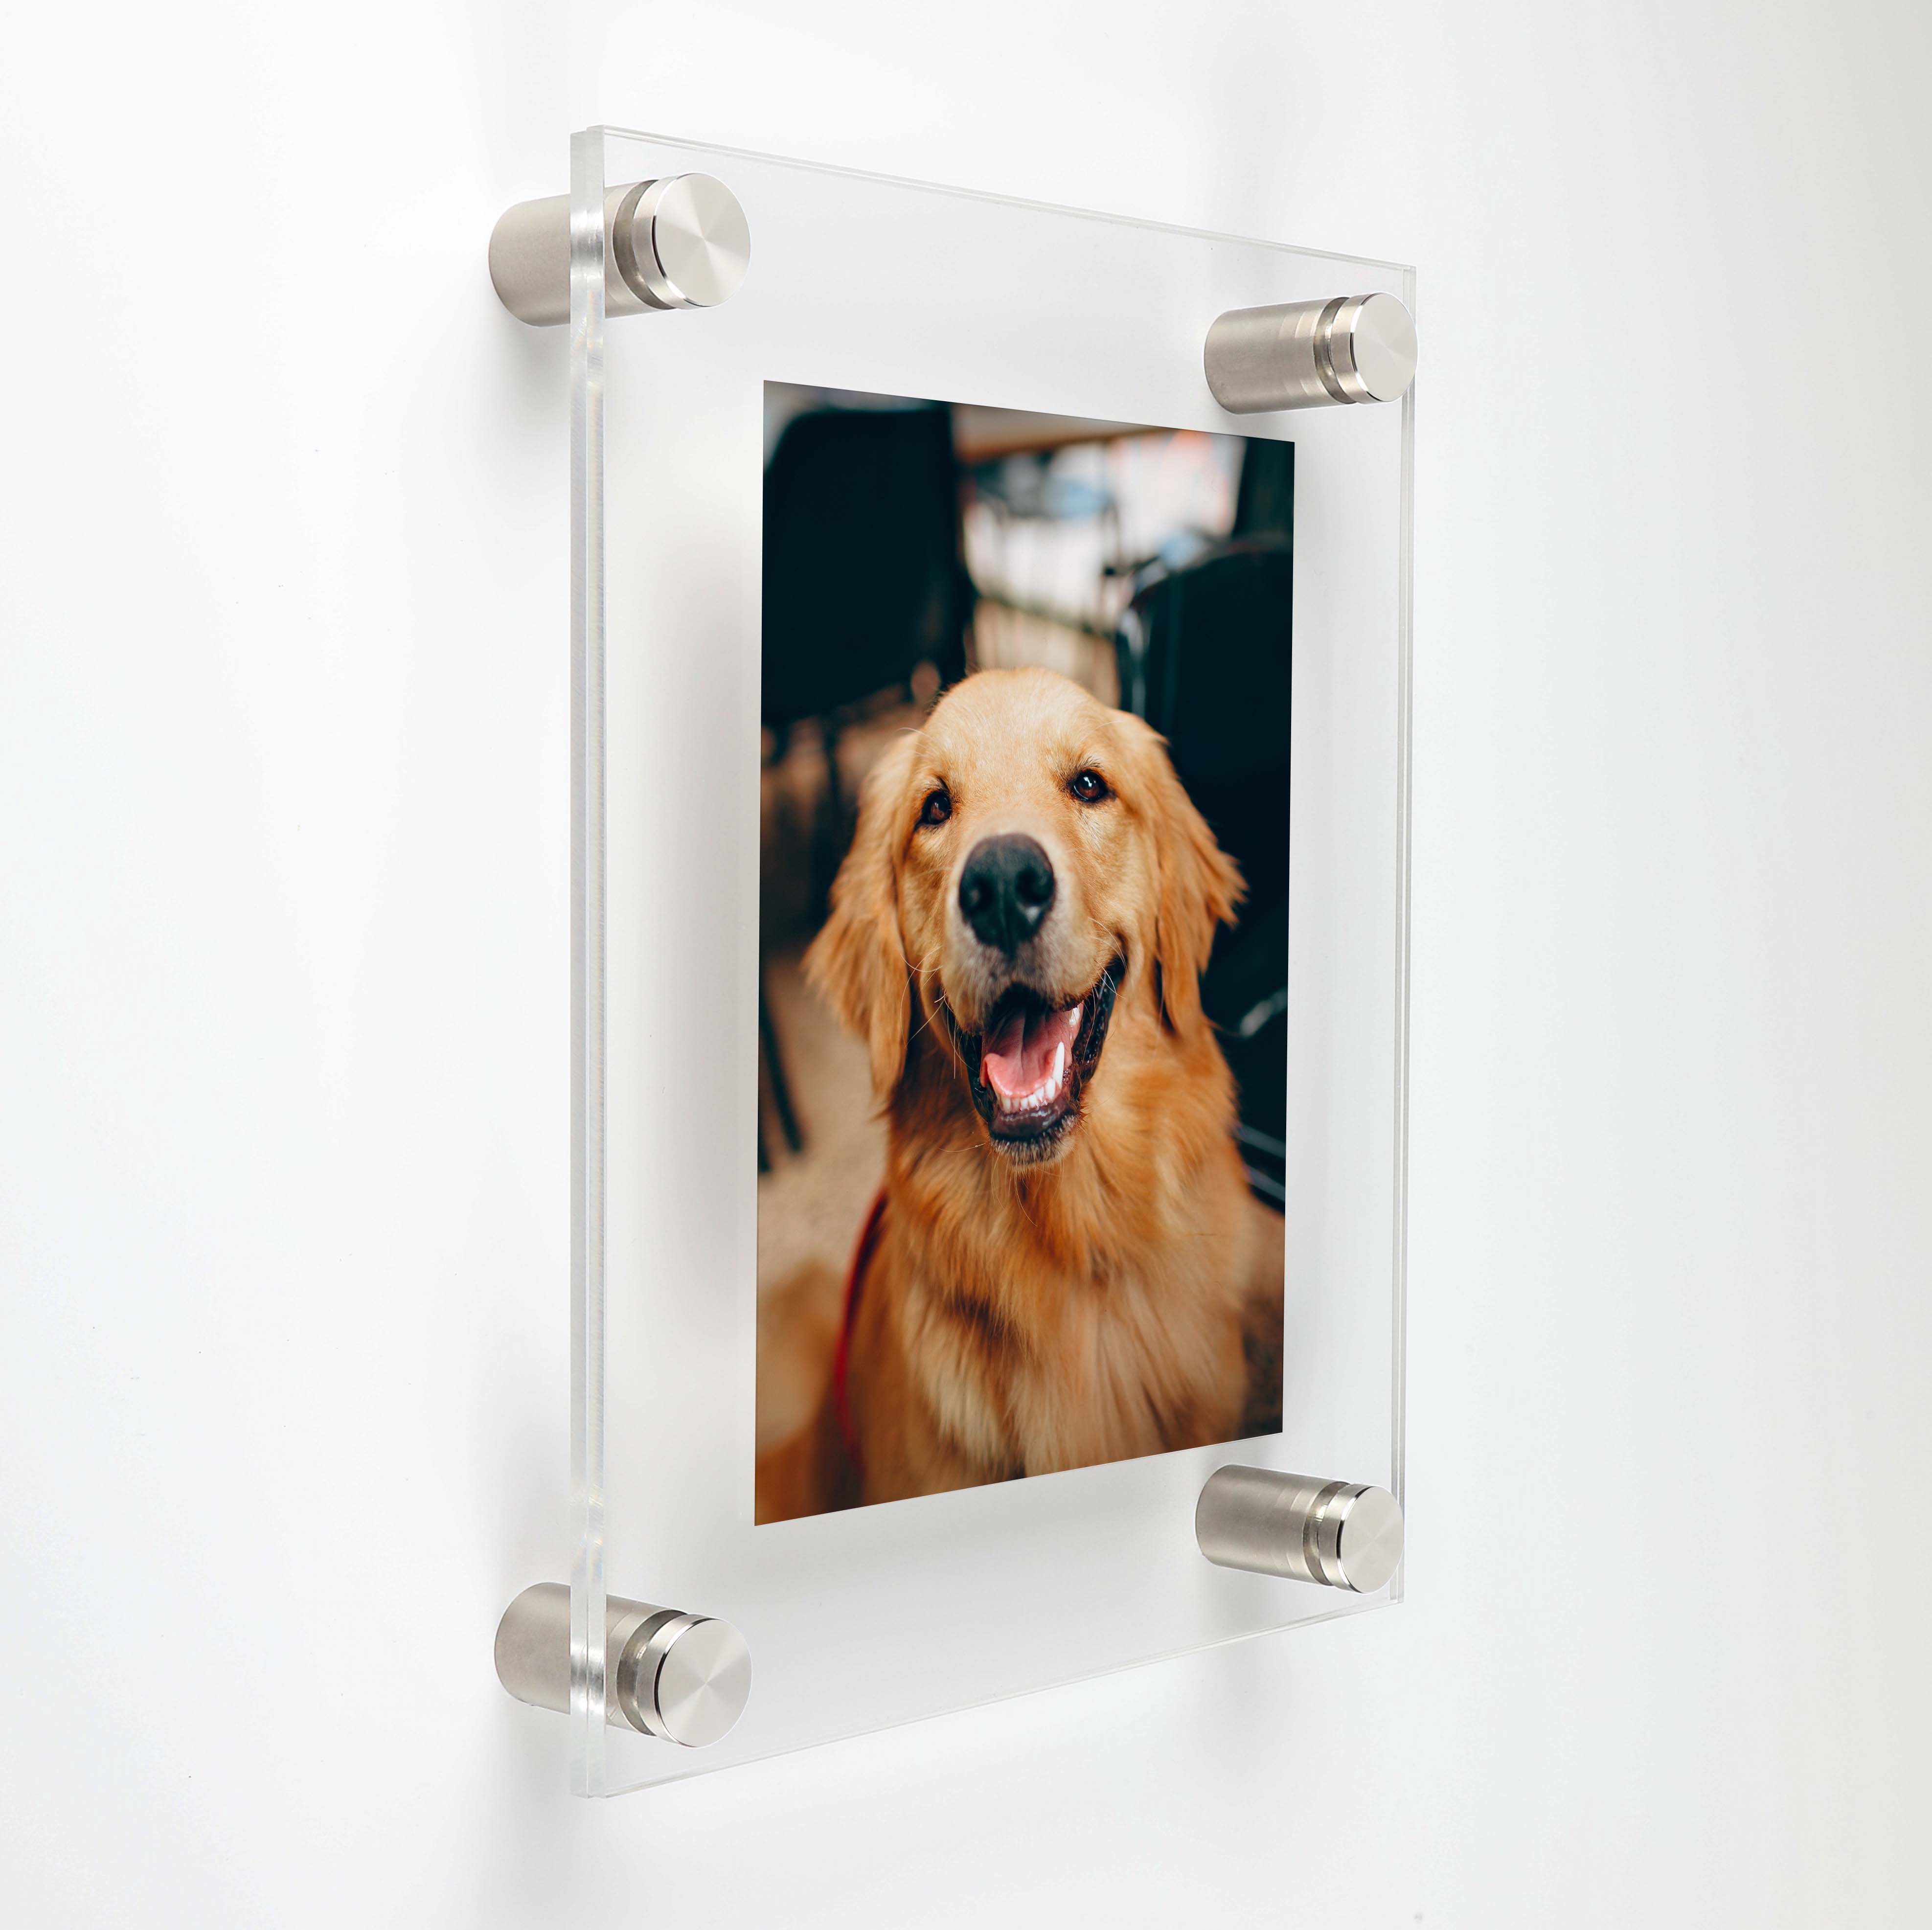 (2) 23-3/4'' x 29-3/4'' Clear Acrylics , Pre-Drilled With Polished Edges (Thick 3/16'' each), Wall Frame with (4) 5/8'' x 1'' Brushed Stainless Steel Standoffs includes Screws and Anchors